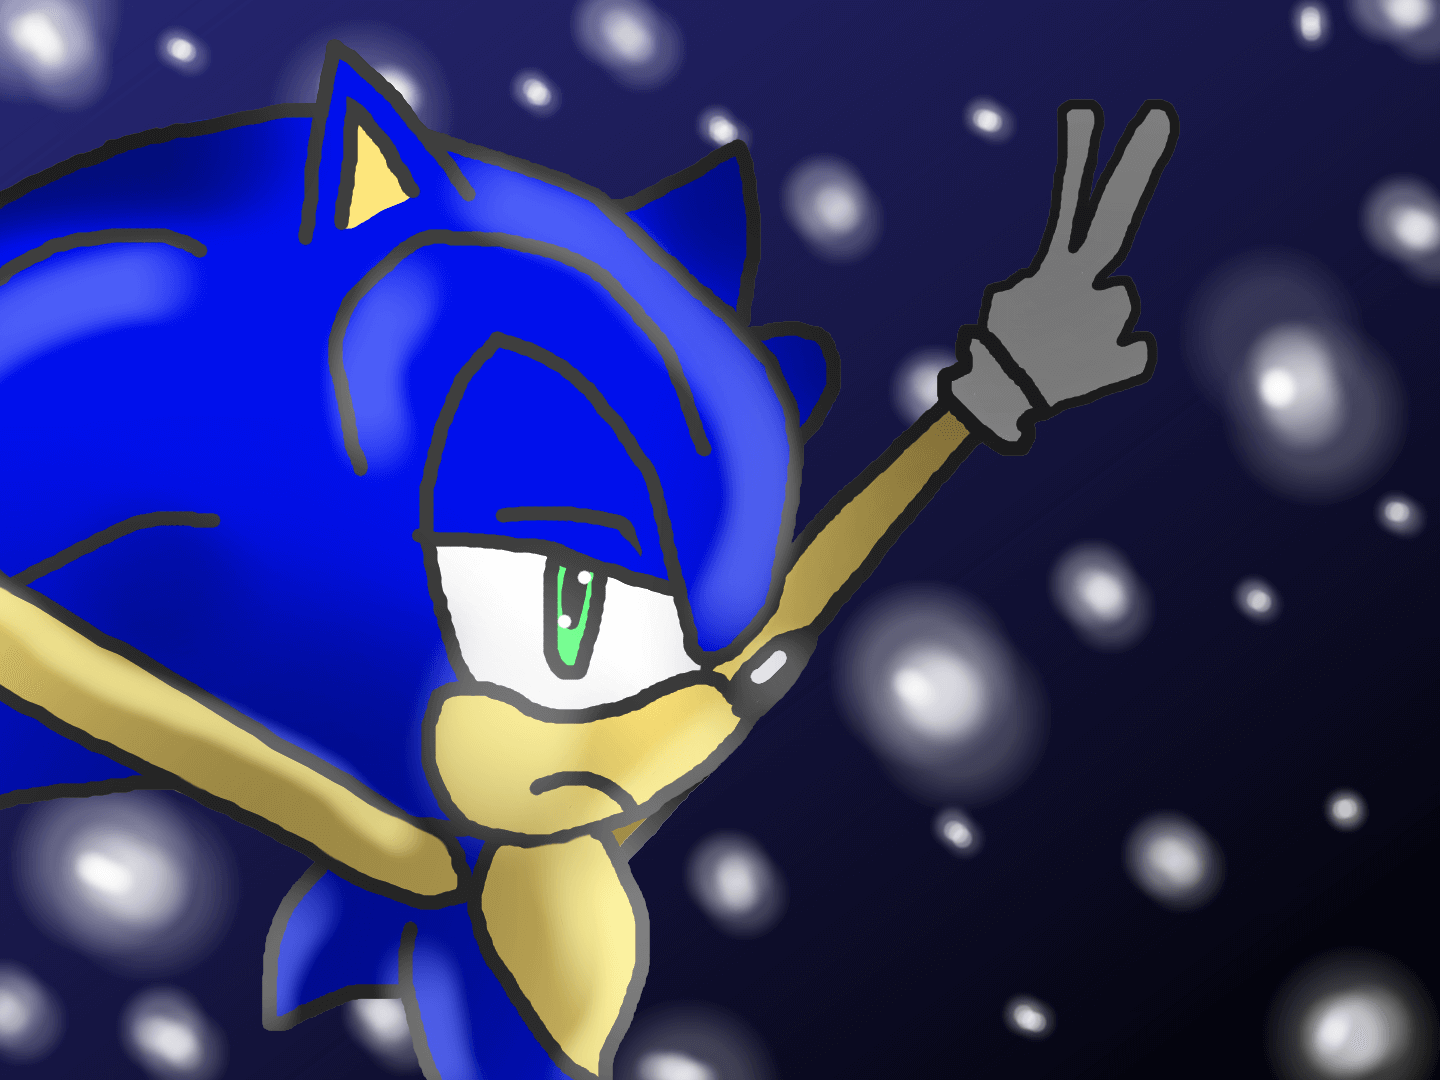 Sonic making peace signs while lights surround him. Click through to its dedicated webpage for a more detailed description.